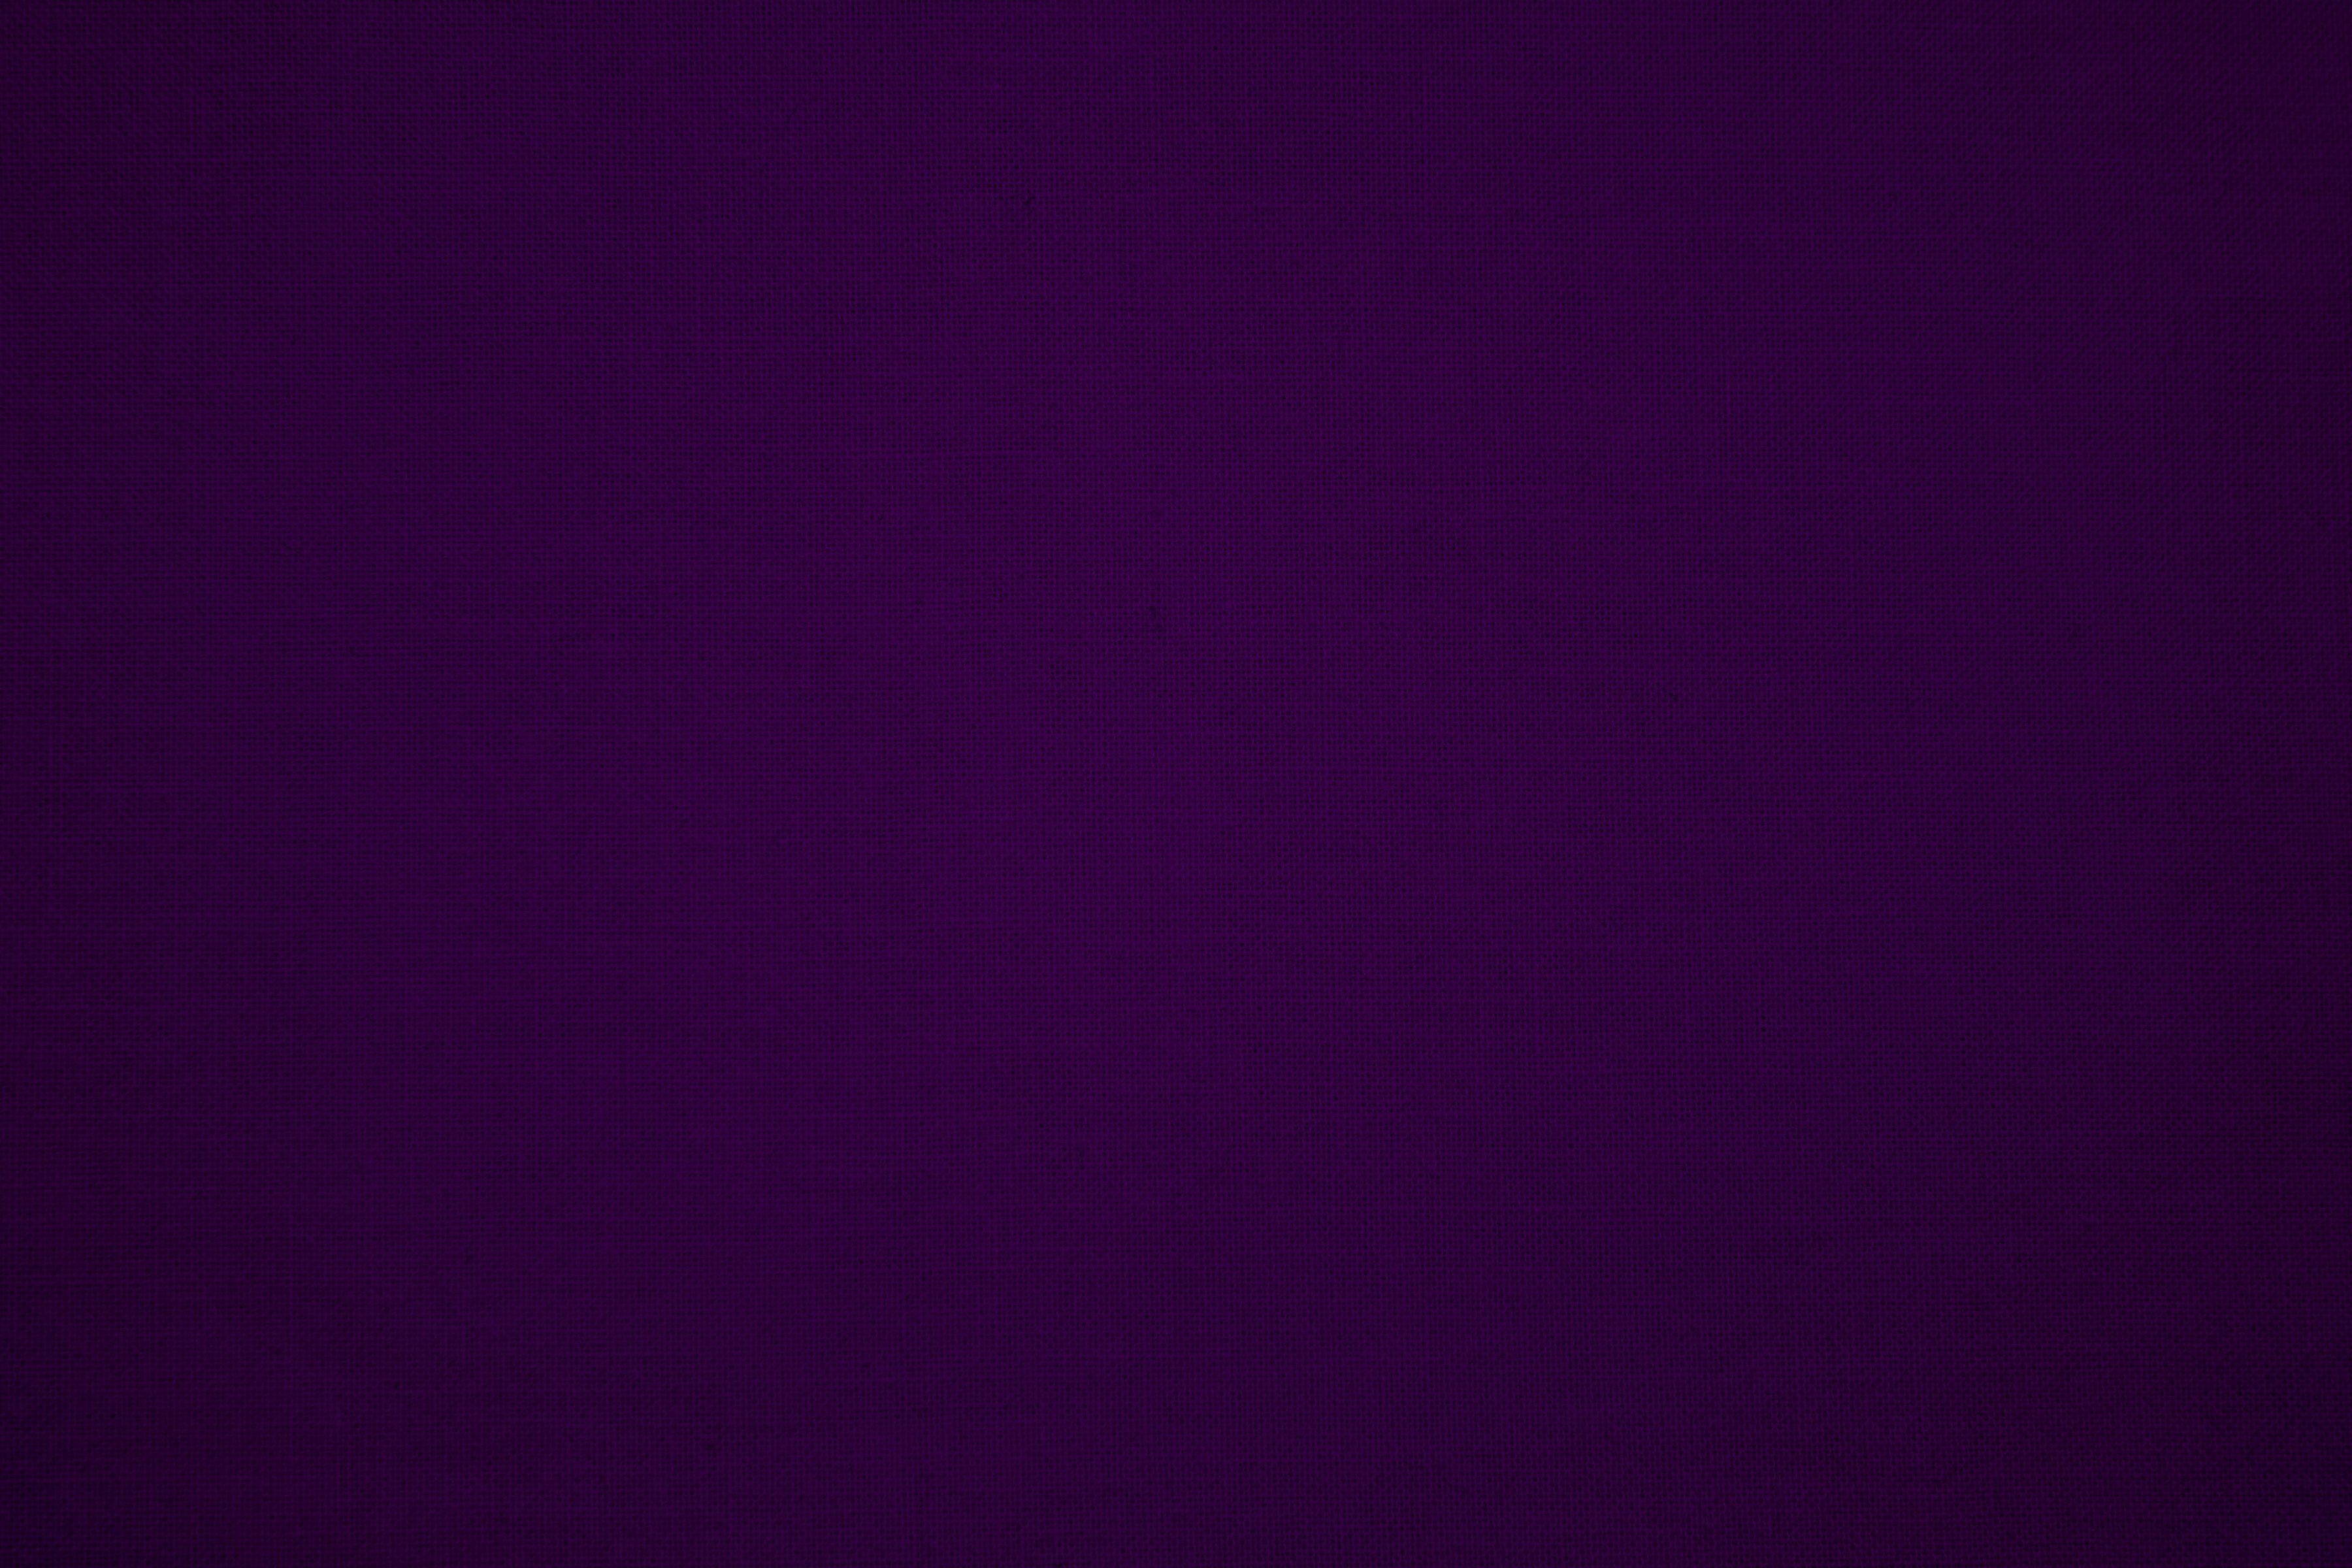 Wallpapers For Plain Dark Purple Backgrounds